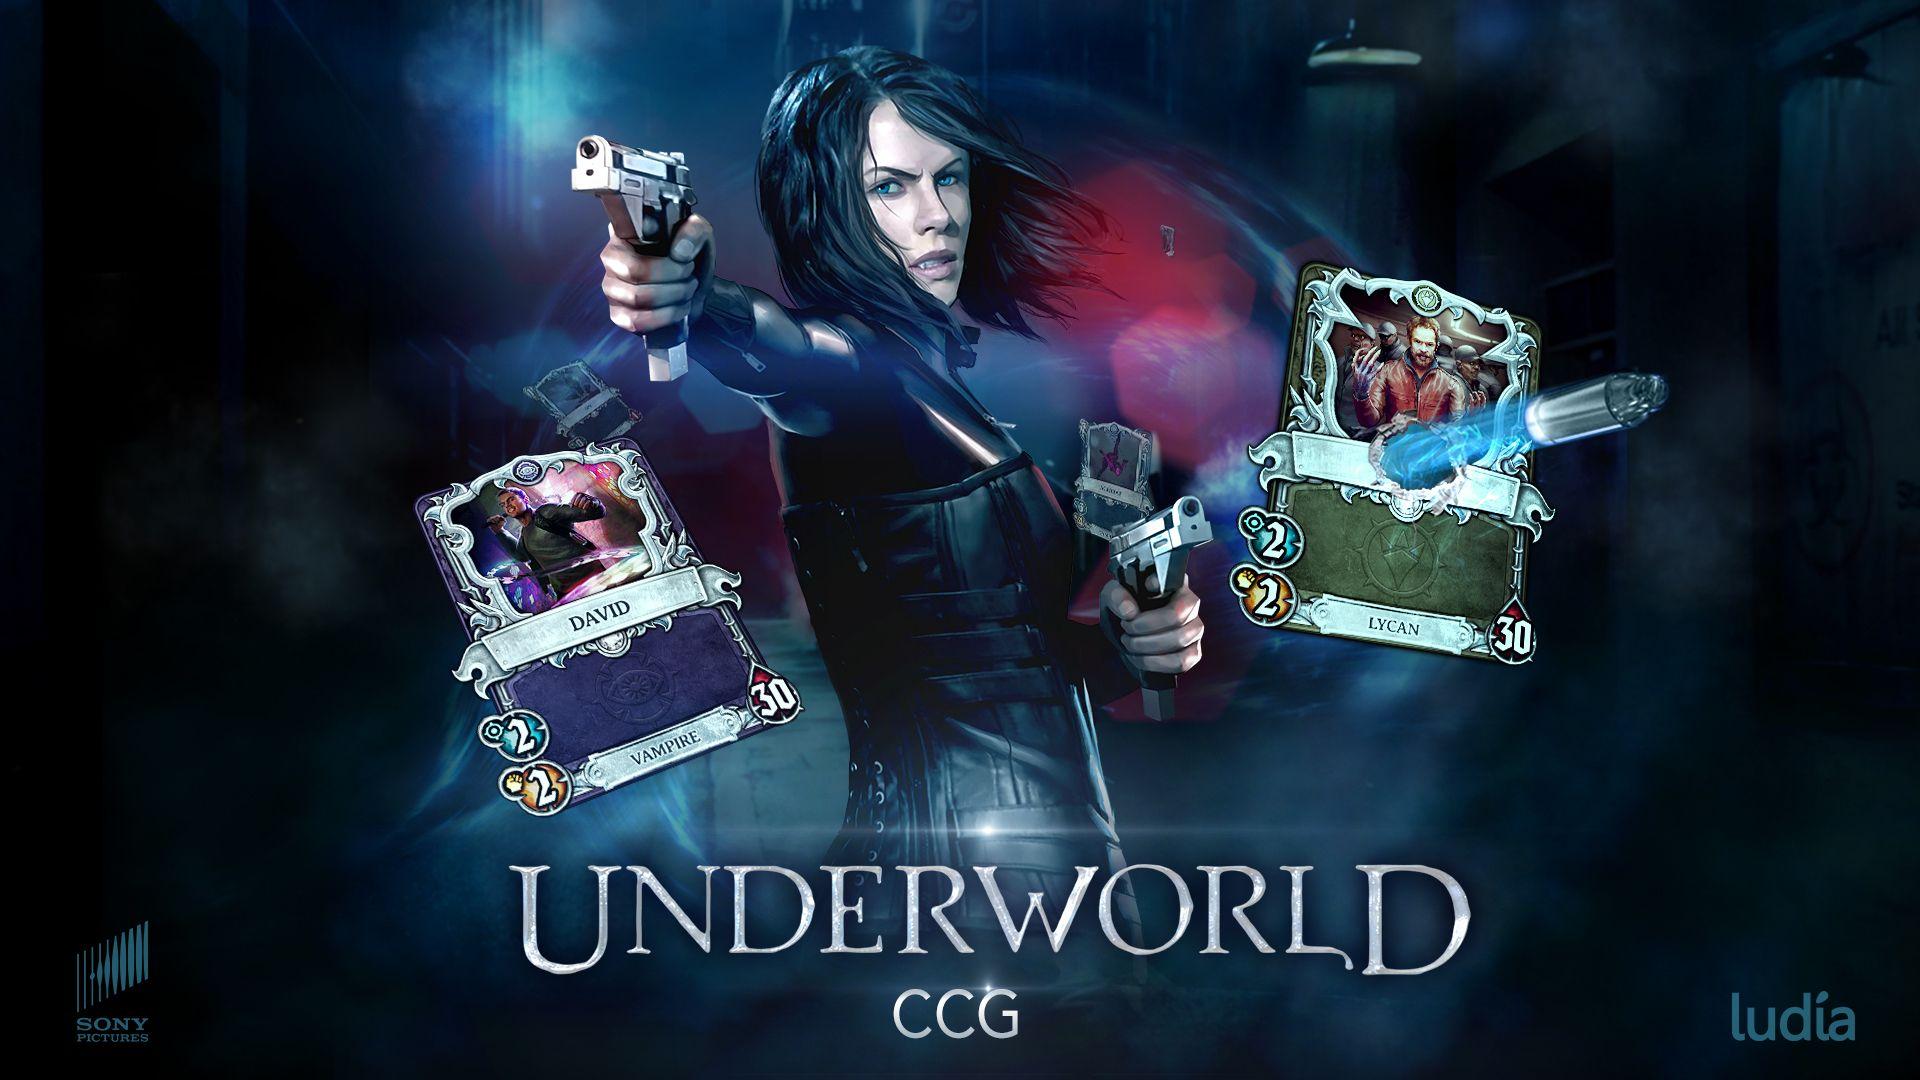 Underworld Vampire Logo - Underworld” Films Now a New Mobile Collectible Card Game as